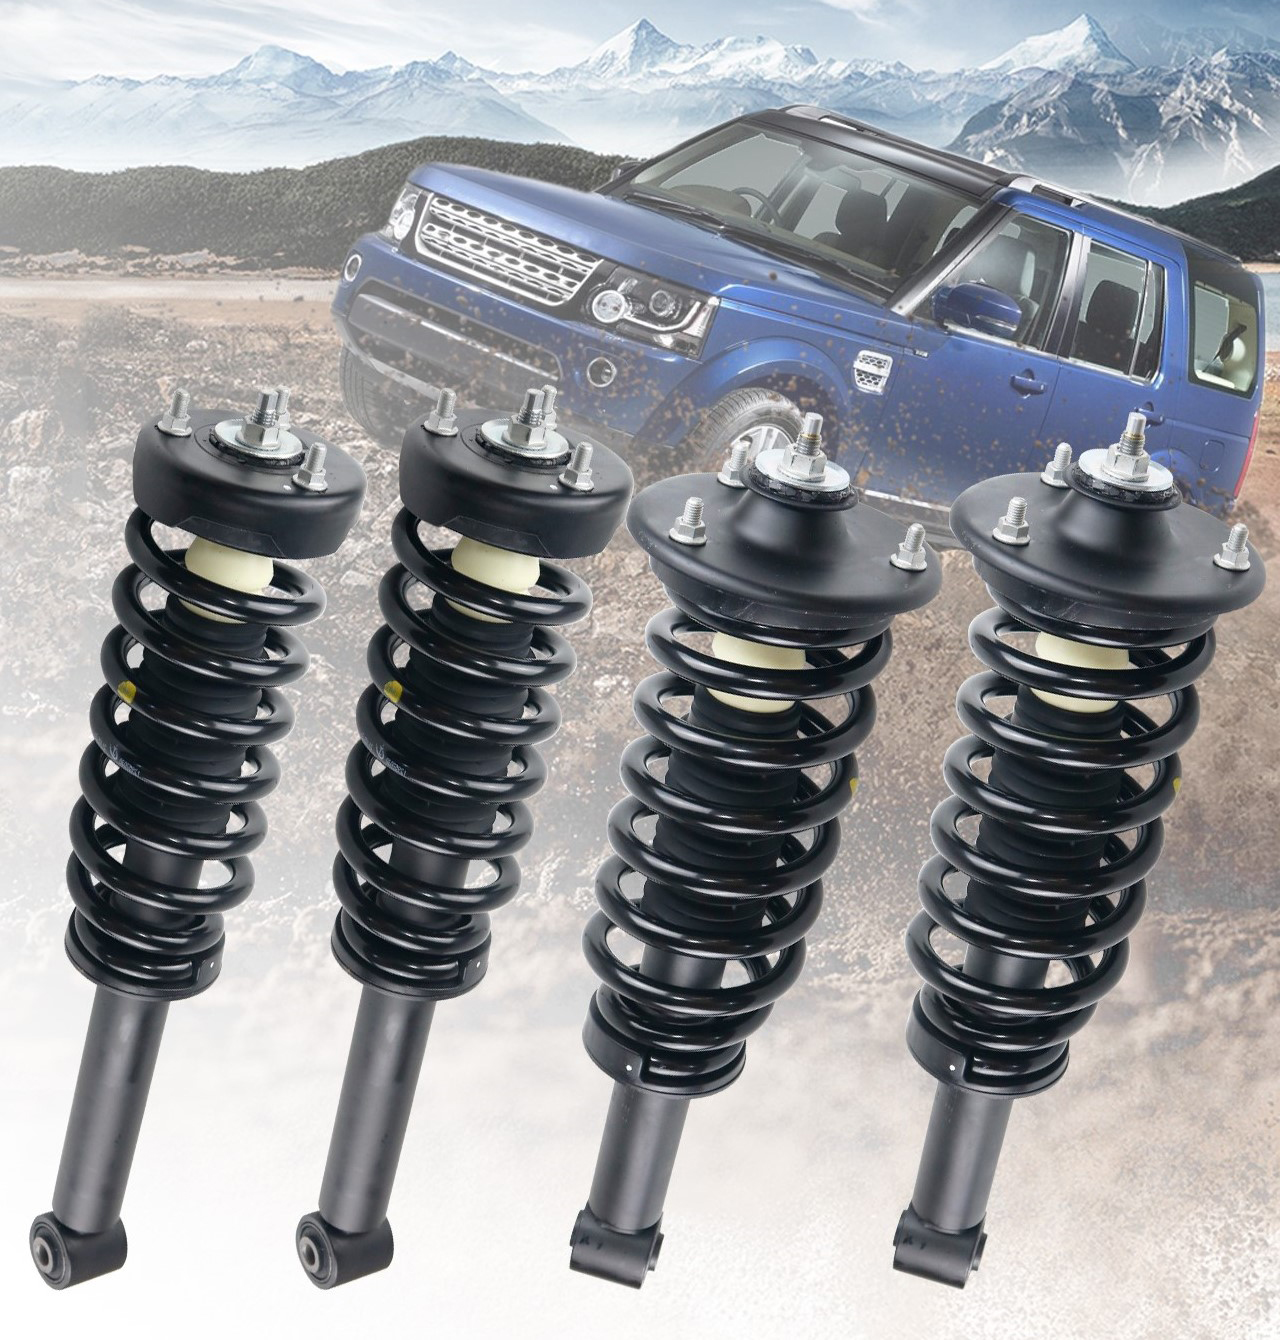 LEACREE launches new Complete Struts in October, 2021